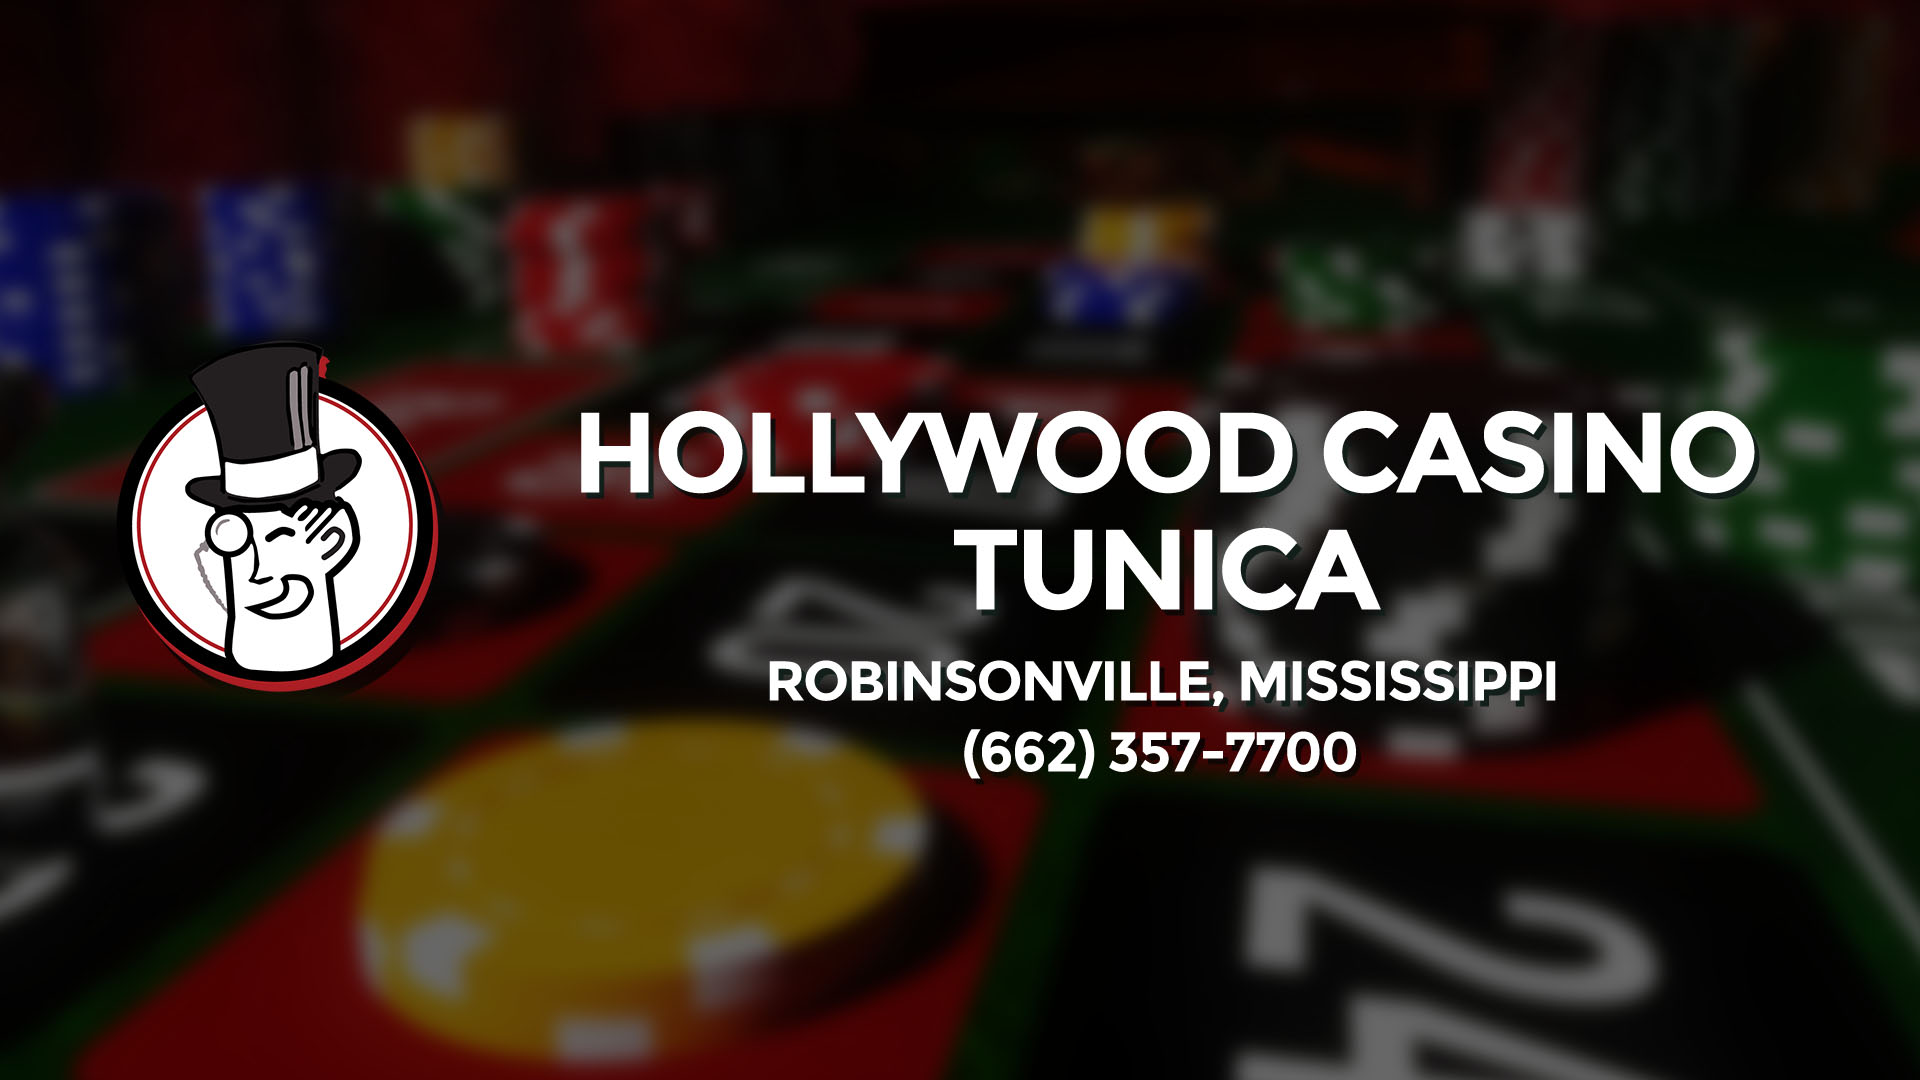 hollywood casino tunica mississippi phone number